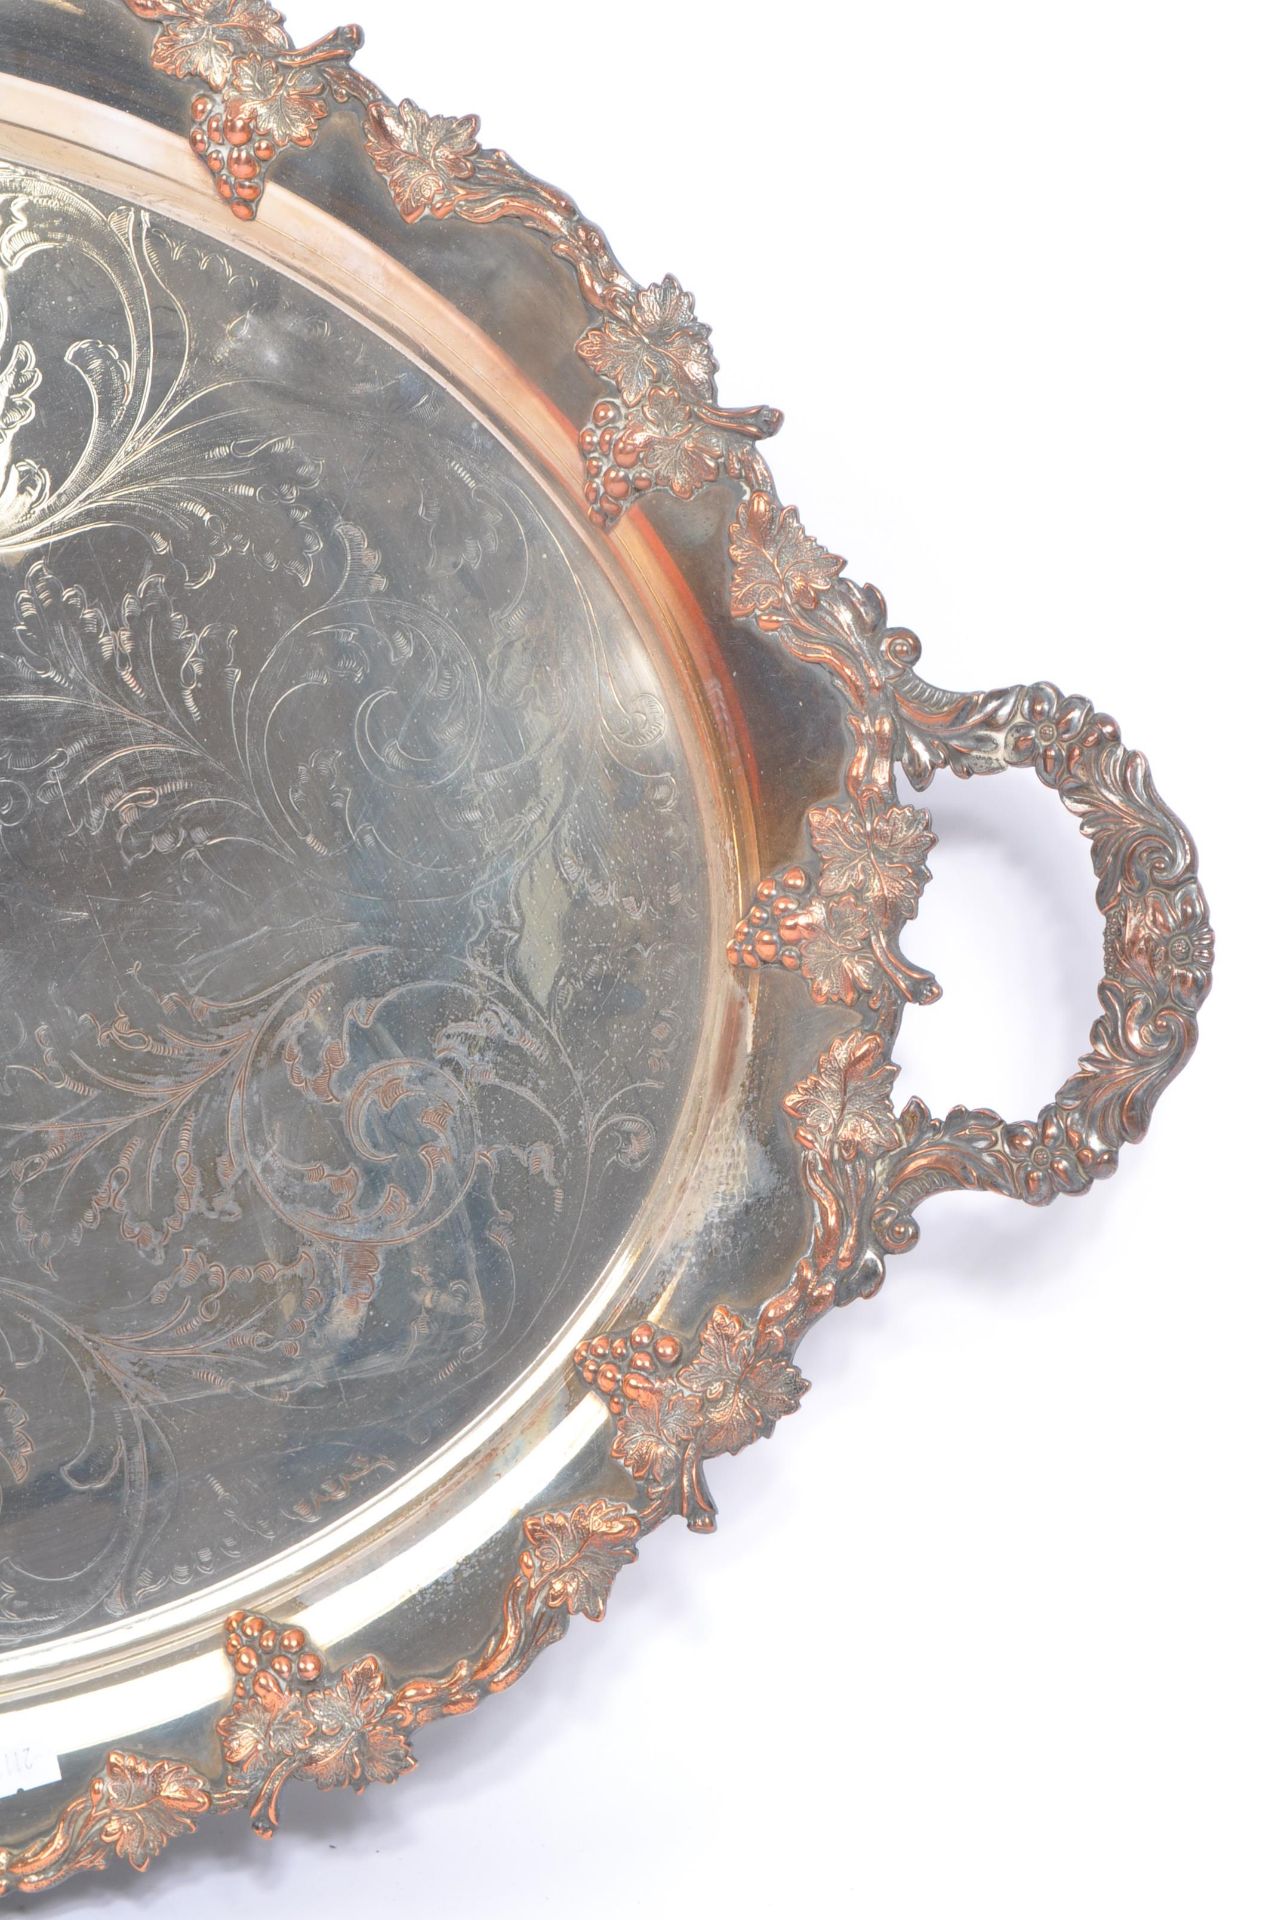 EARLY 20TH CENTURY WHITE METAL ENGRAVED SERVING TRAY - Image 2 of 6